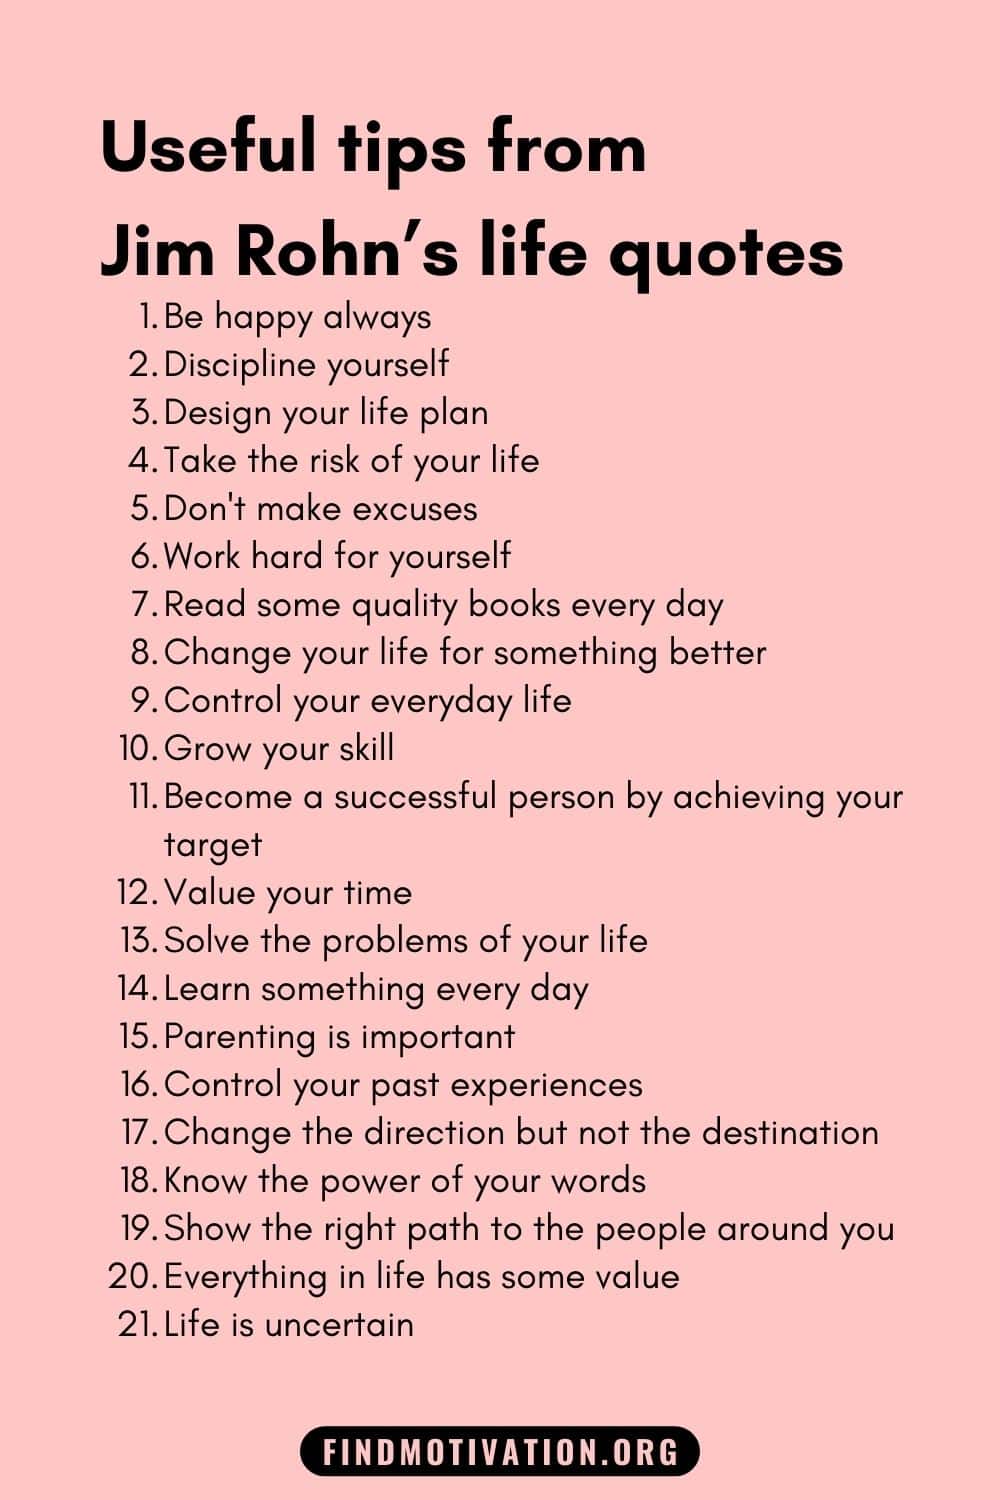 Inspiring Jim Rohn's life quotes will help you to change and build your life by practicing some useful tips